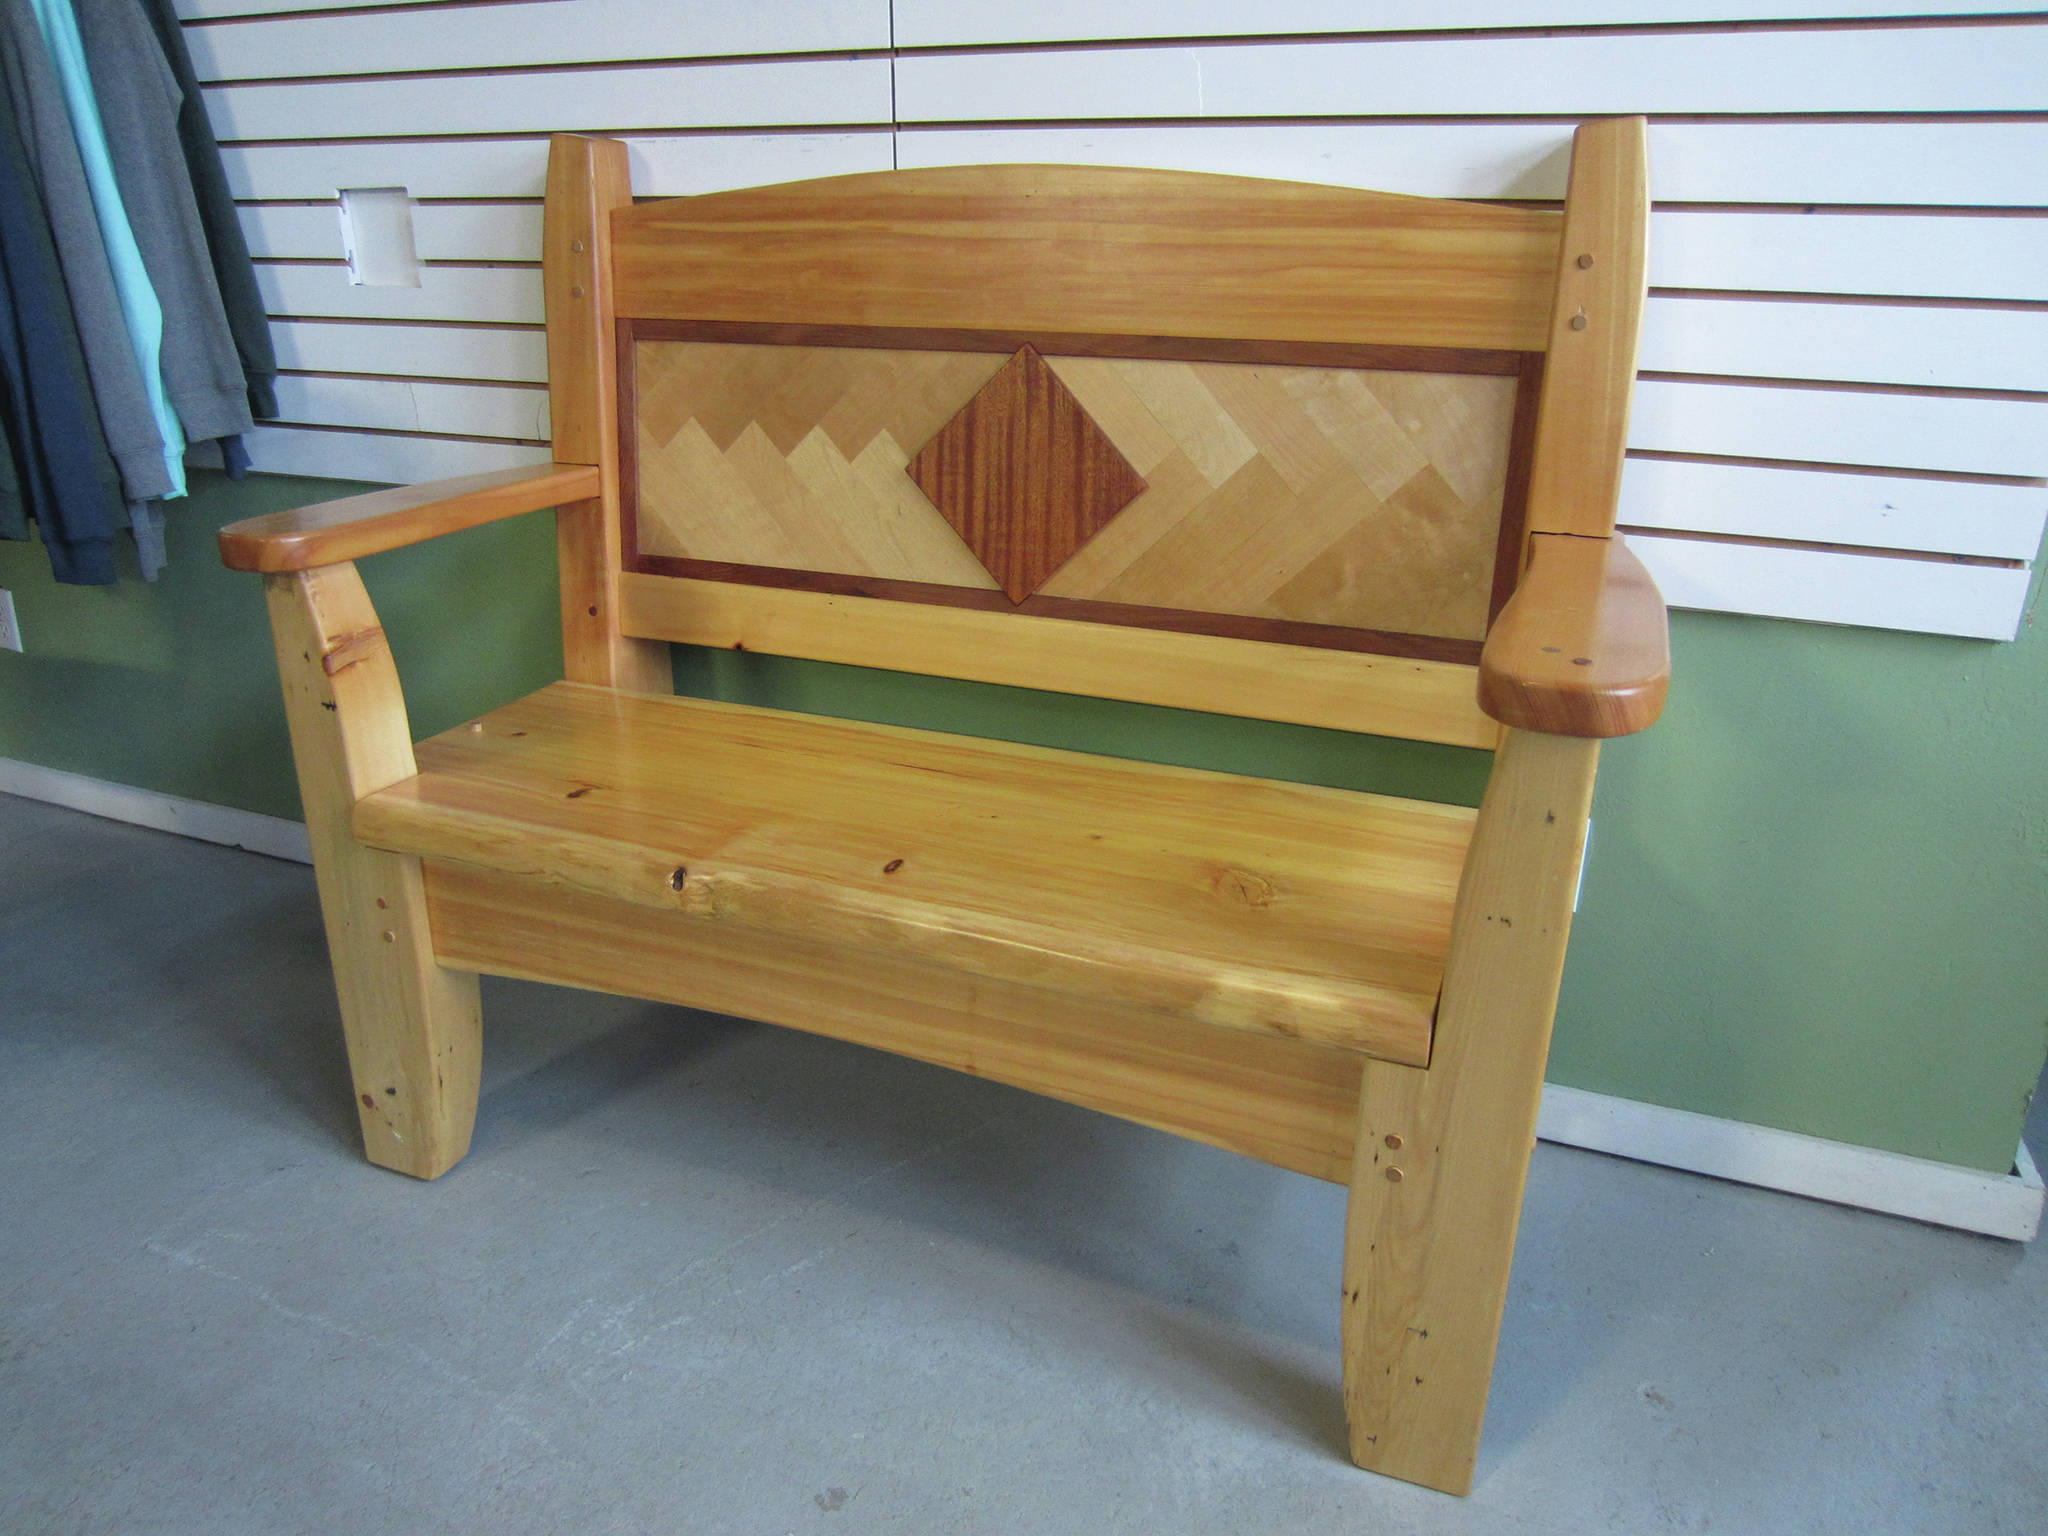 Jonathan Sharp’s bench is part of an exhibit of his work opening Friday, March 6, 2020, at Grace Ridge Brewery in Homer, Alaska. (Photo courtesy of Jonathan Sharp)